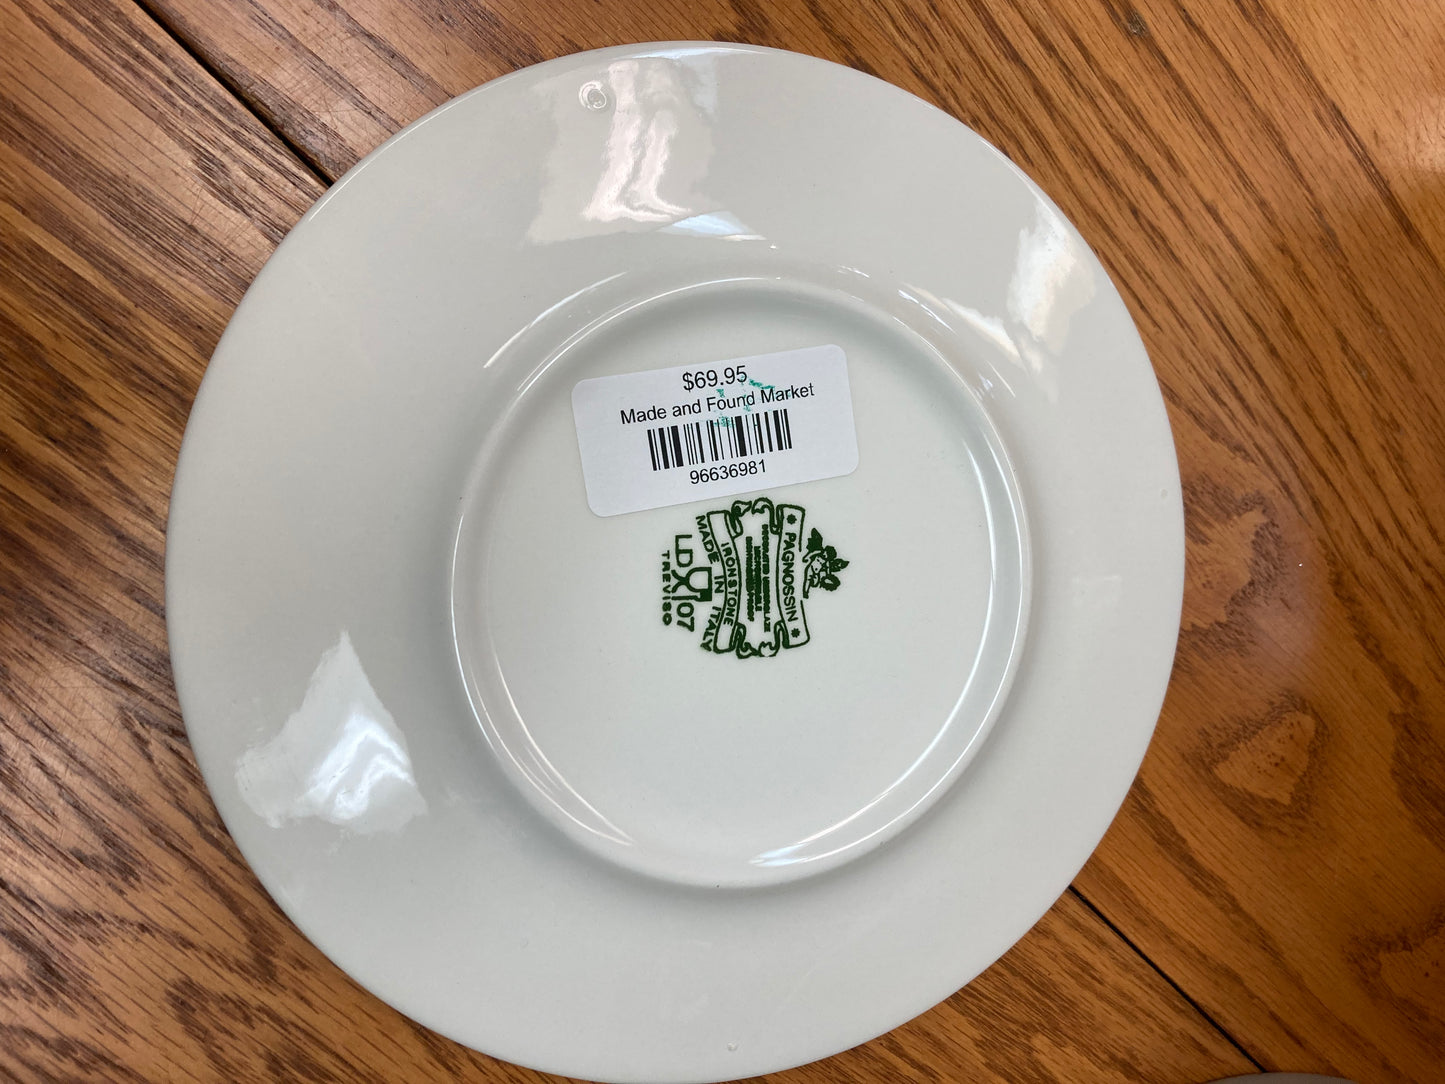 Pagnossin Ironstone AUDREY salad plate, Robin's Egg Blue Brown Band, Made in Italy, Crate & Barrel $69.95 set of 8